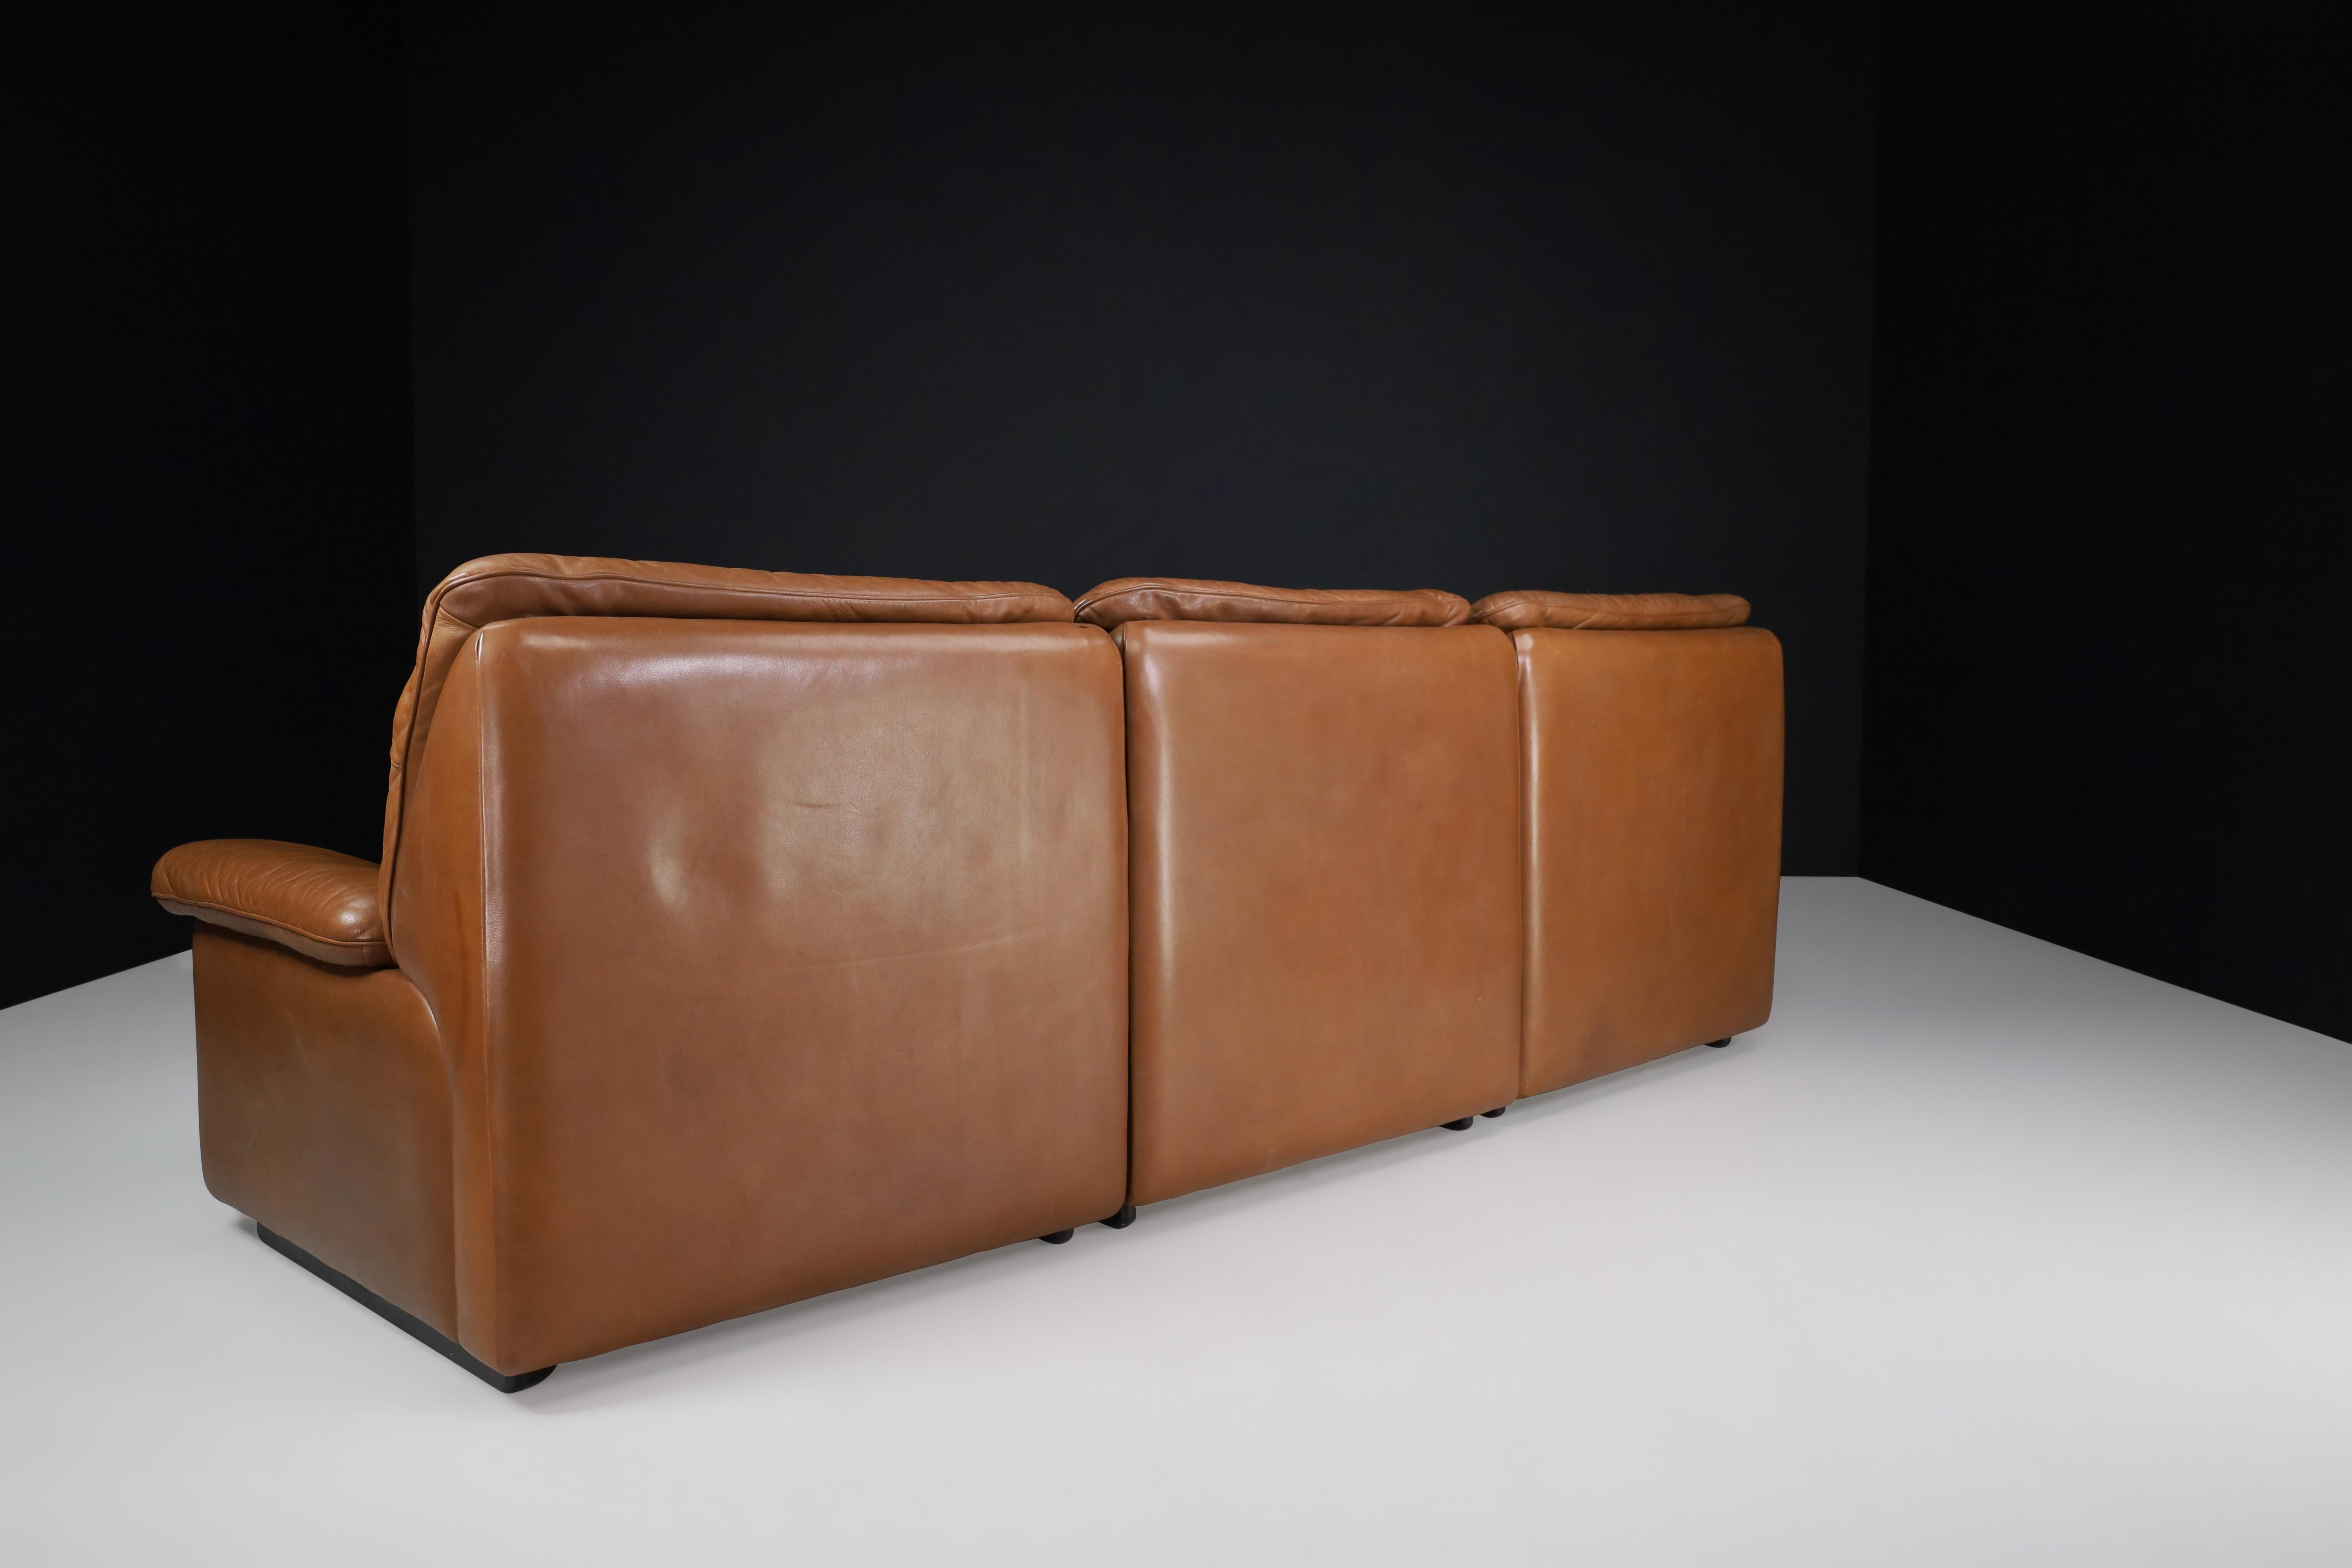 Swiss De Sede Ds 63 Three-Seater Sofa in Patinated Leather, Switzerland, 1970s For Sale